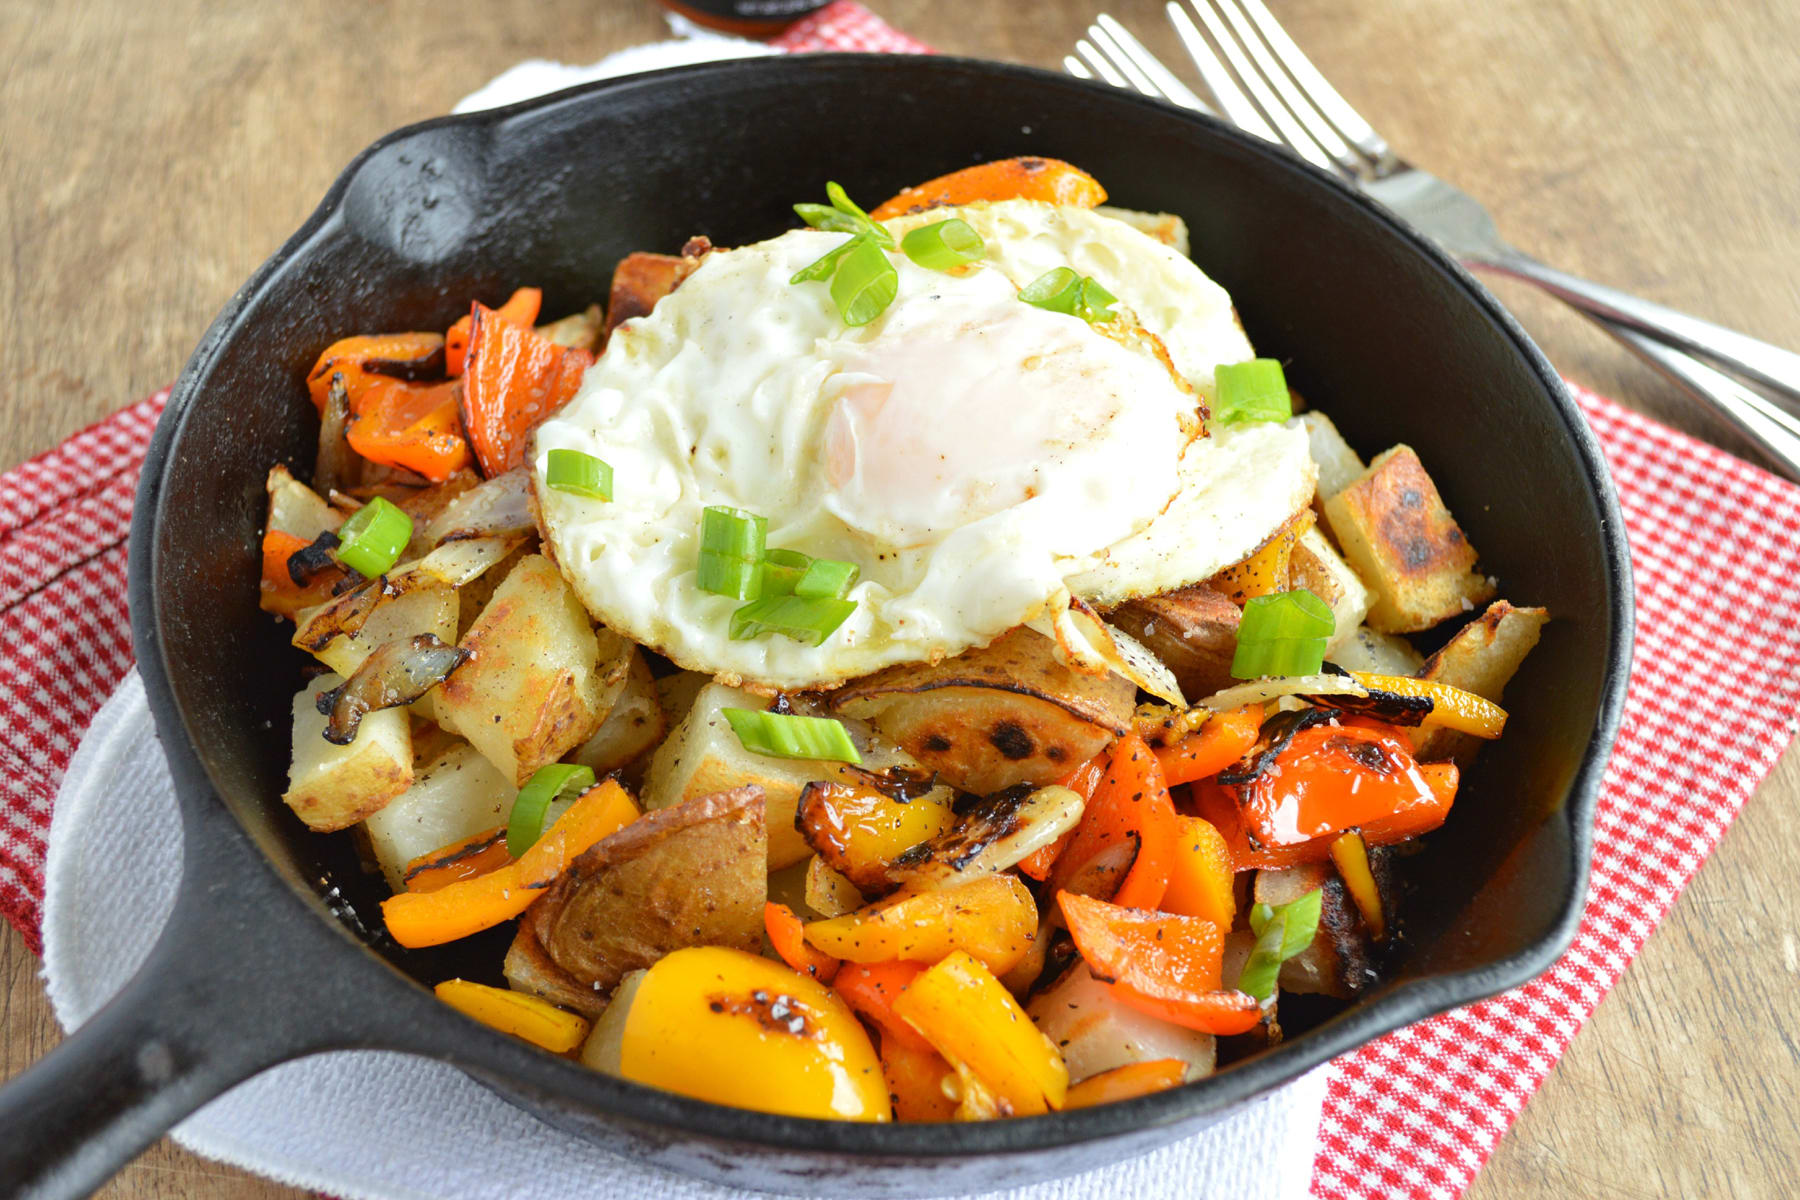 Skillet Breakfast Potatoes - The Whole Cook